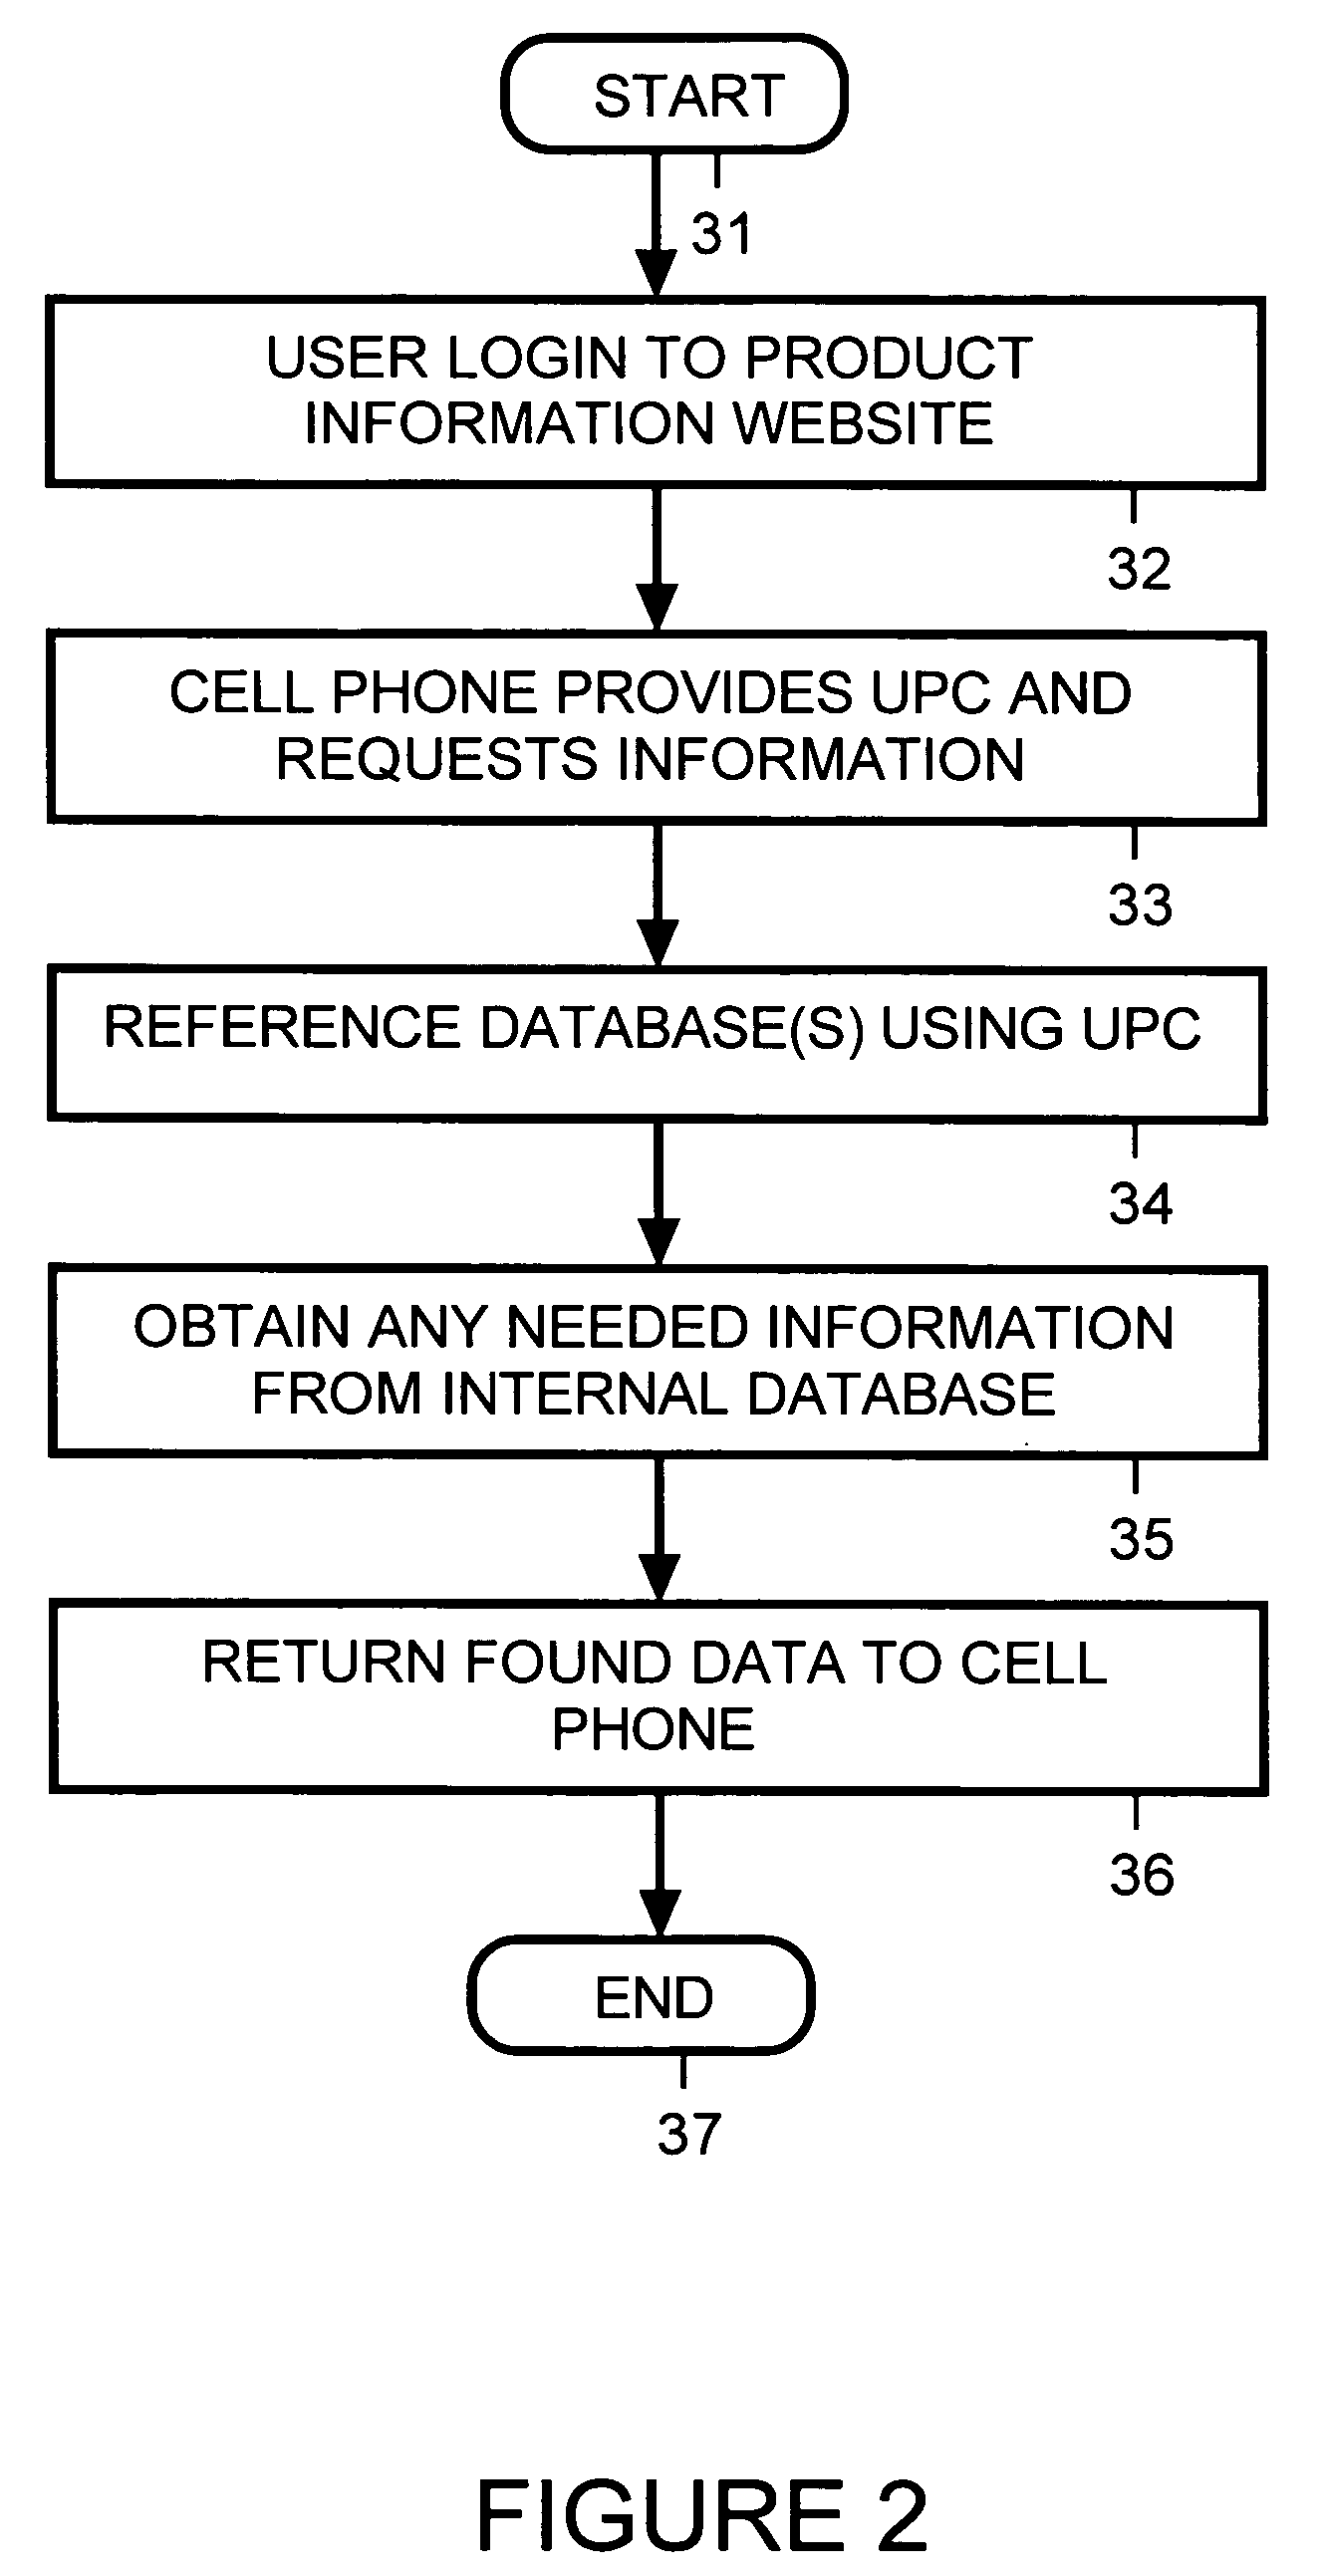 Cell phone based product research